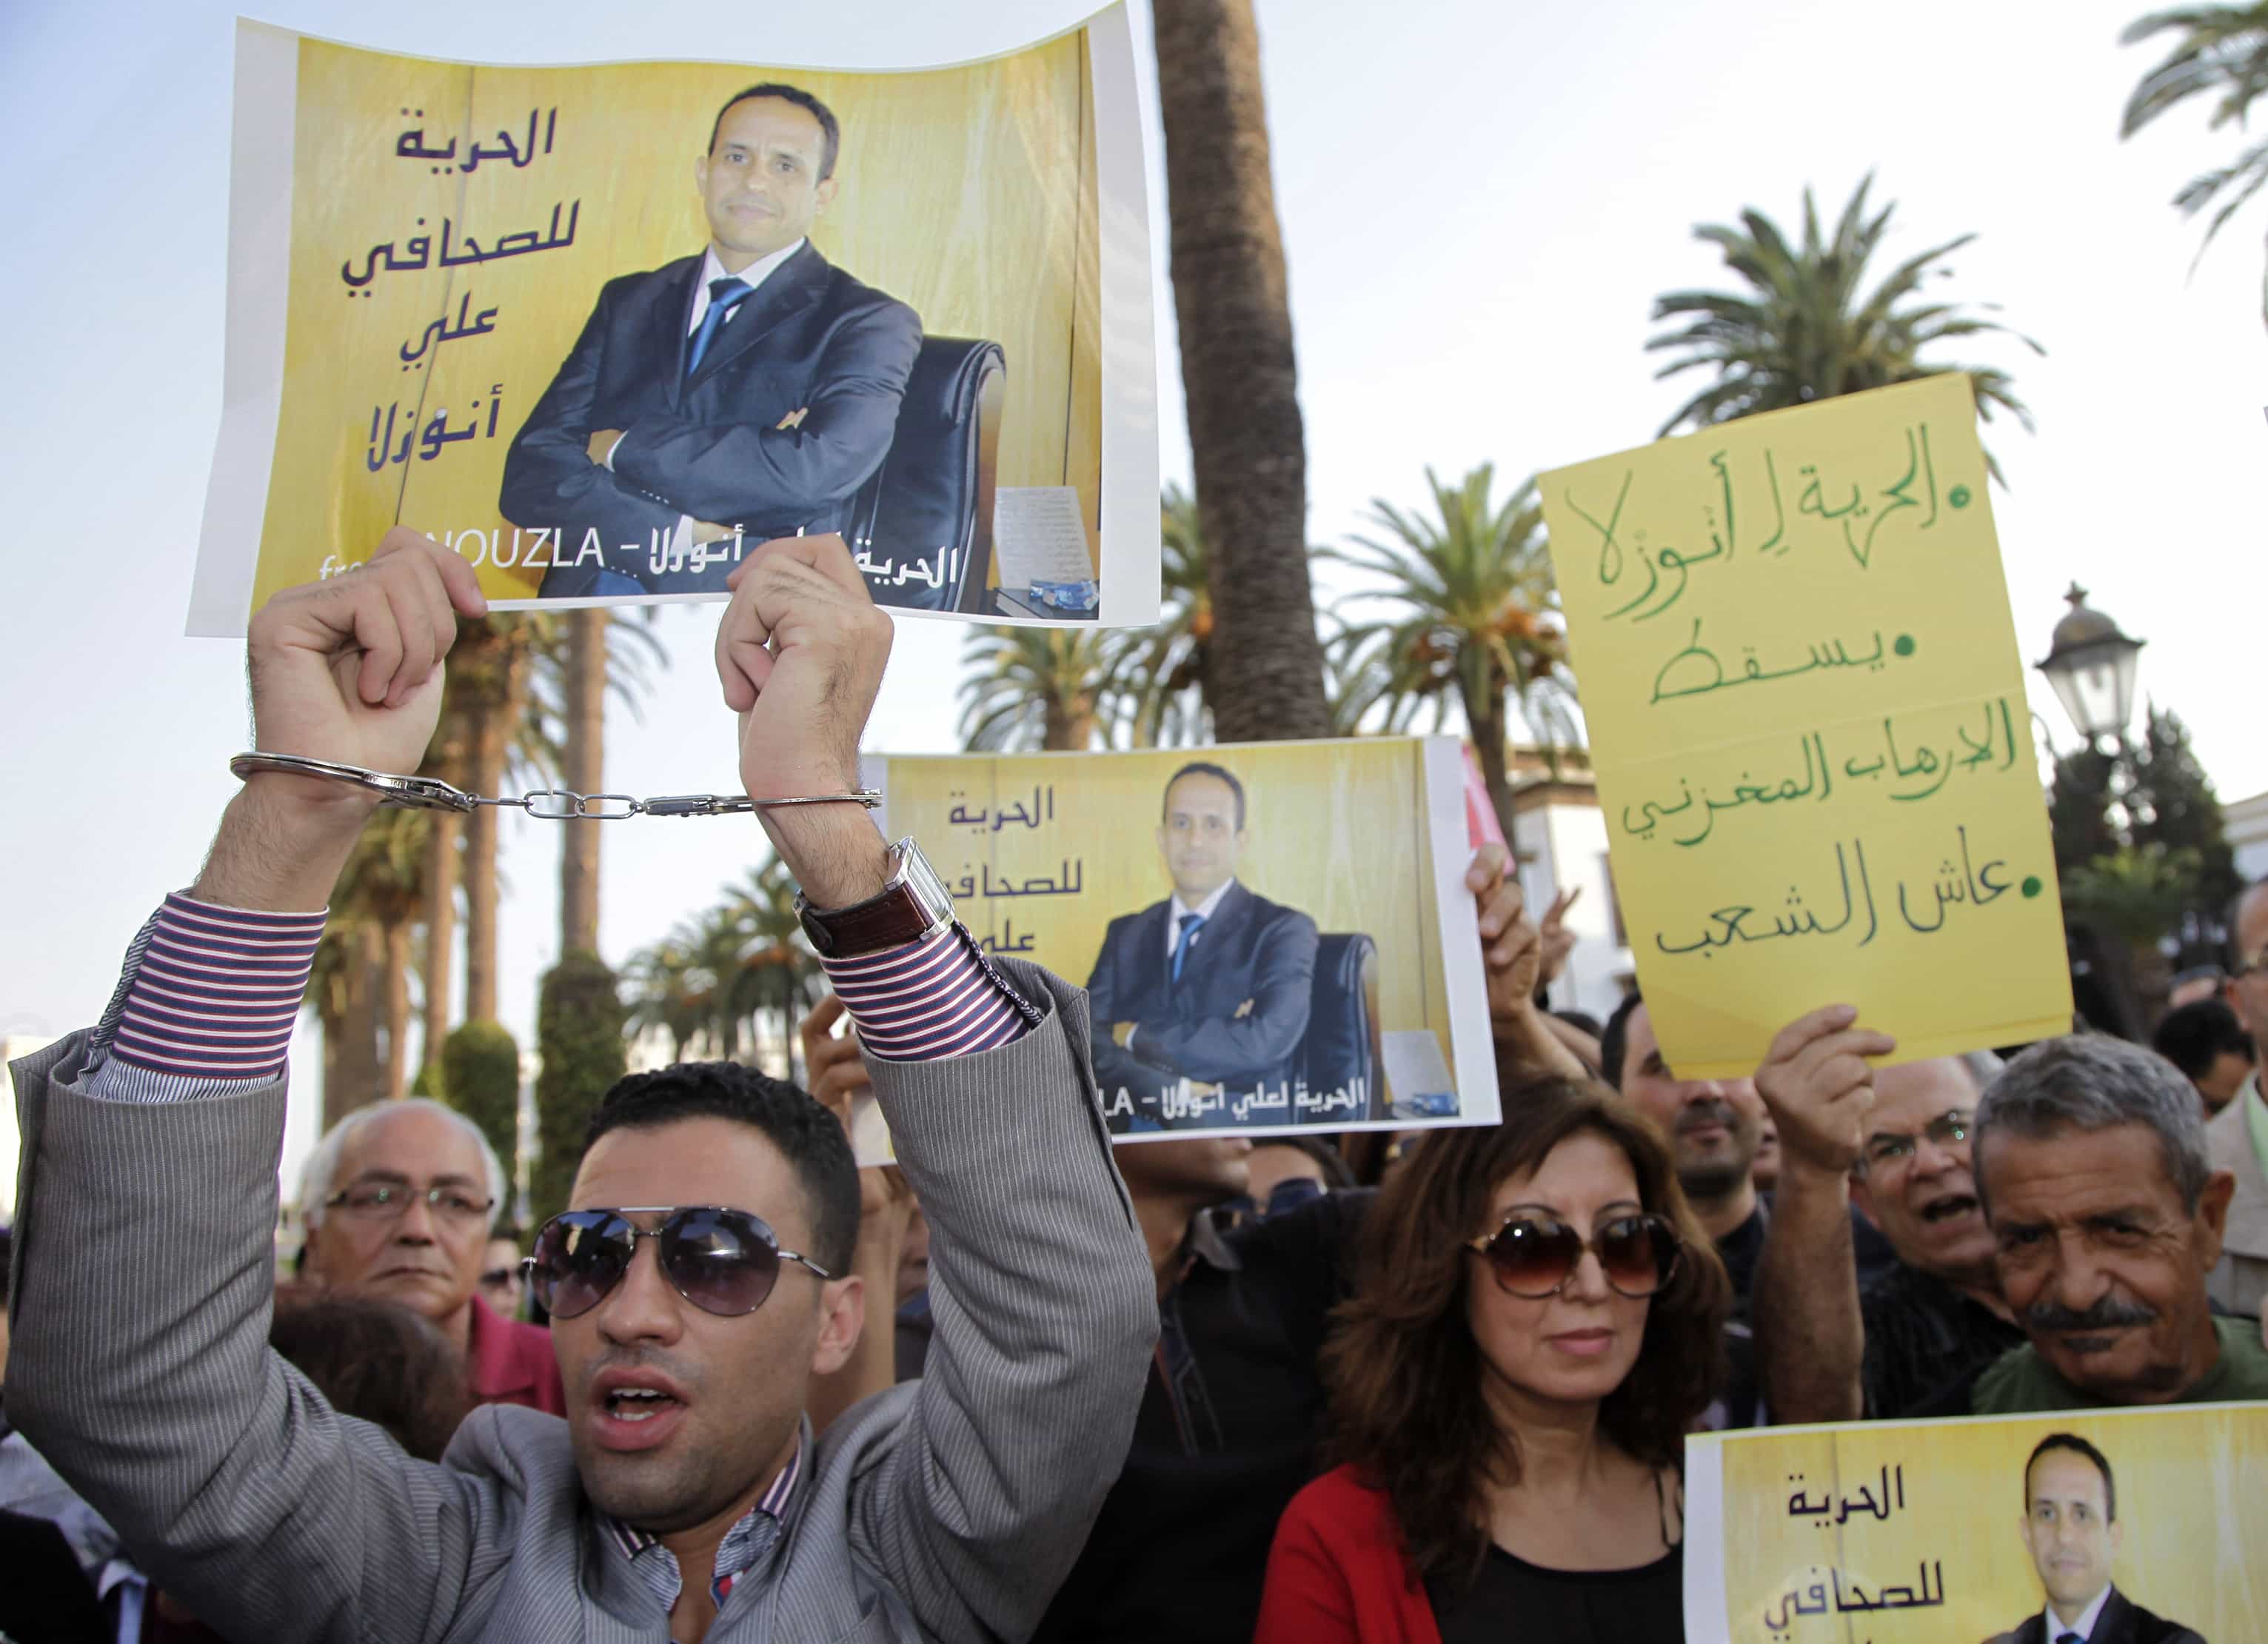 Demonstrators hold signs and posters of Moroccan editor Ali Anouzla during a protest against his arrest on 26 September. Anouzla was arrested after posting posting a link to a video from al Qaeda, REUTERS/Stringer